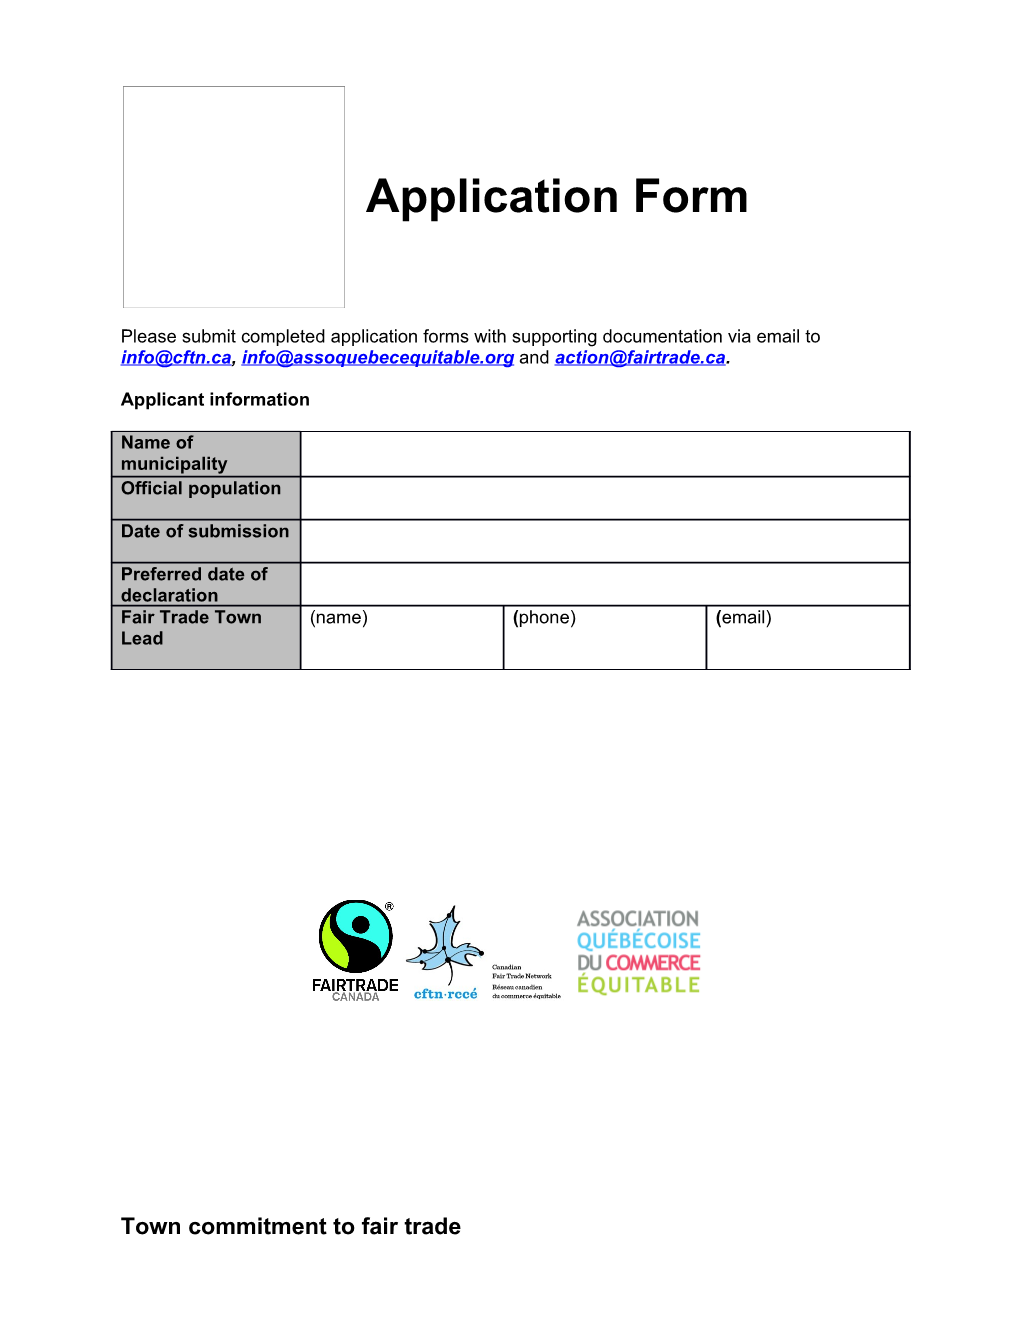 Please Submit Completed Application Forms with Supporting Documentation Via Email to , And